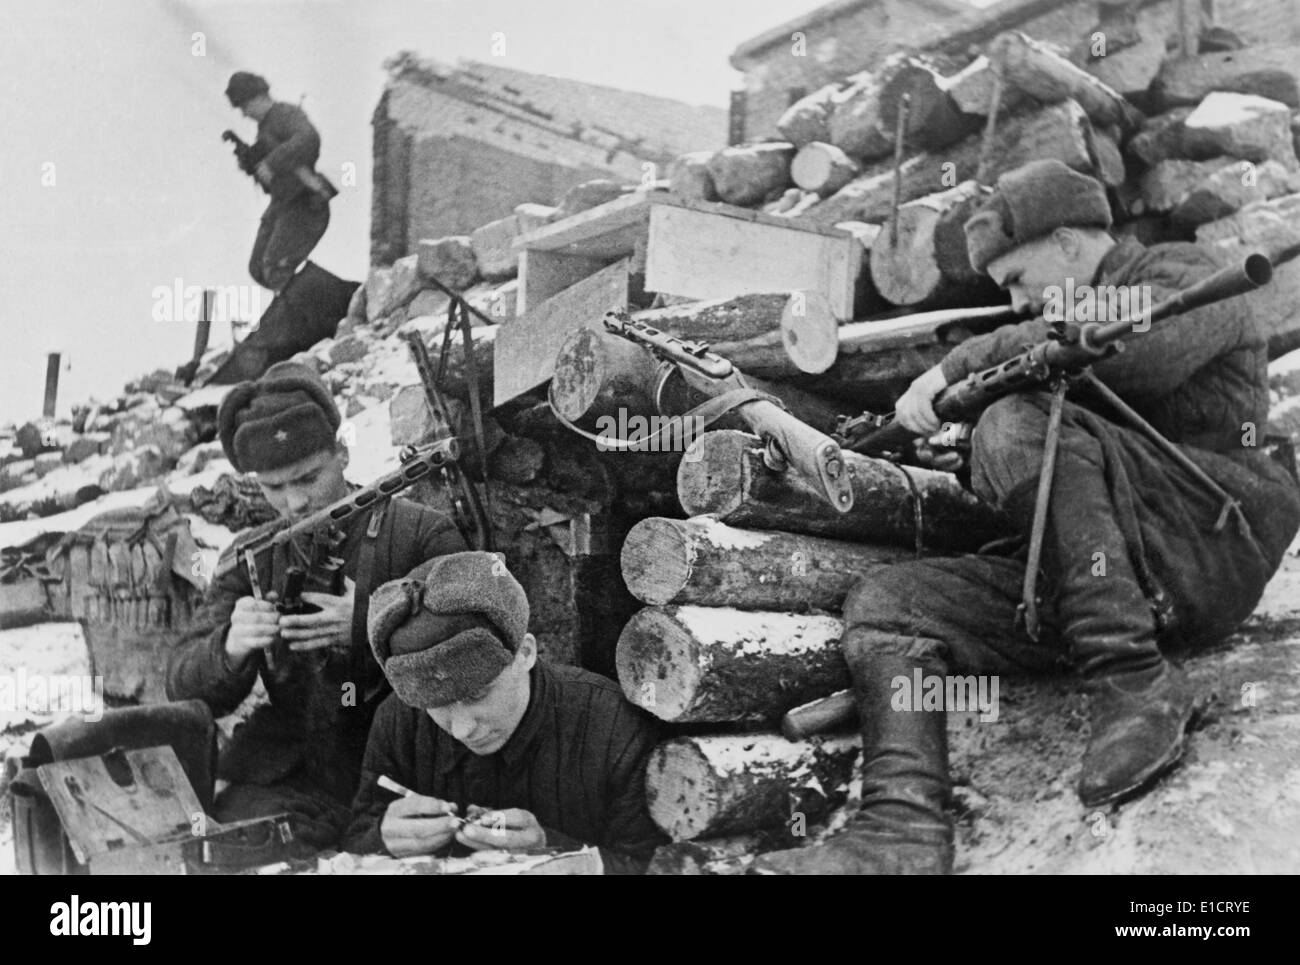 Battle for Stalingrad, World War 2. Soviet troops, at a fortified position, cleaning their weapons. The soldier in foreground Stock Photo